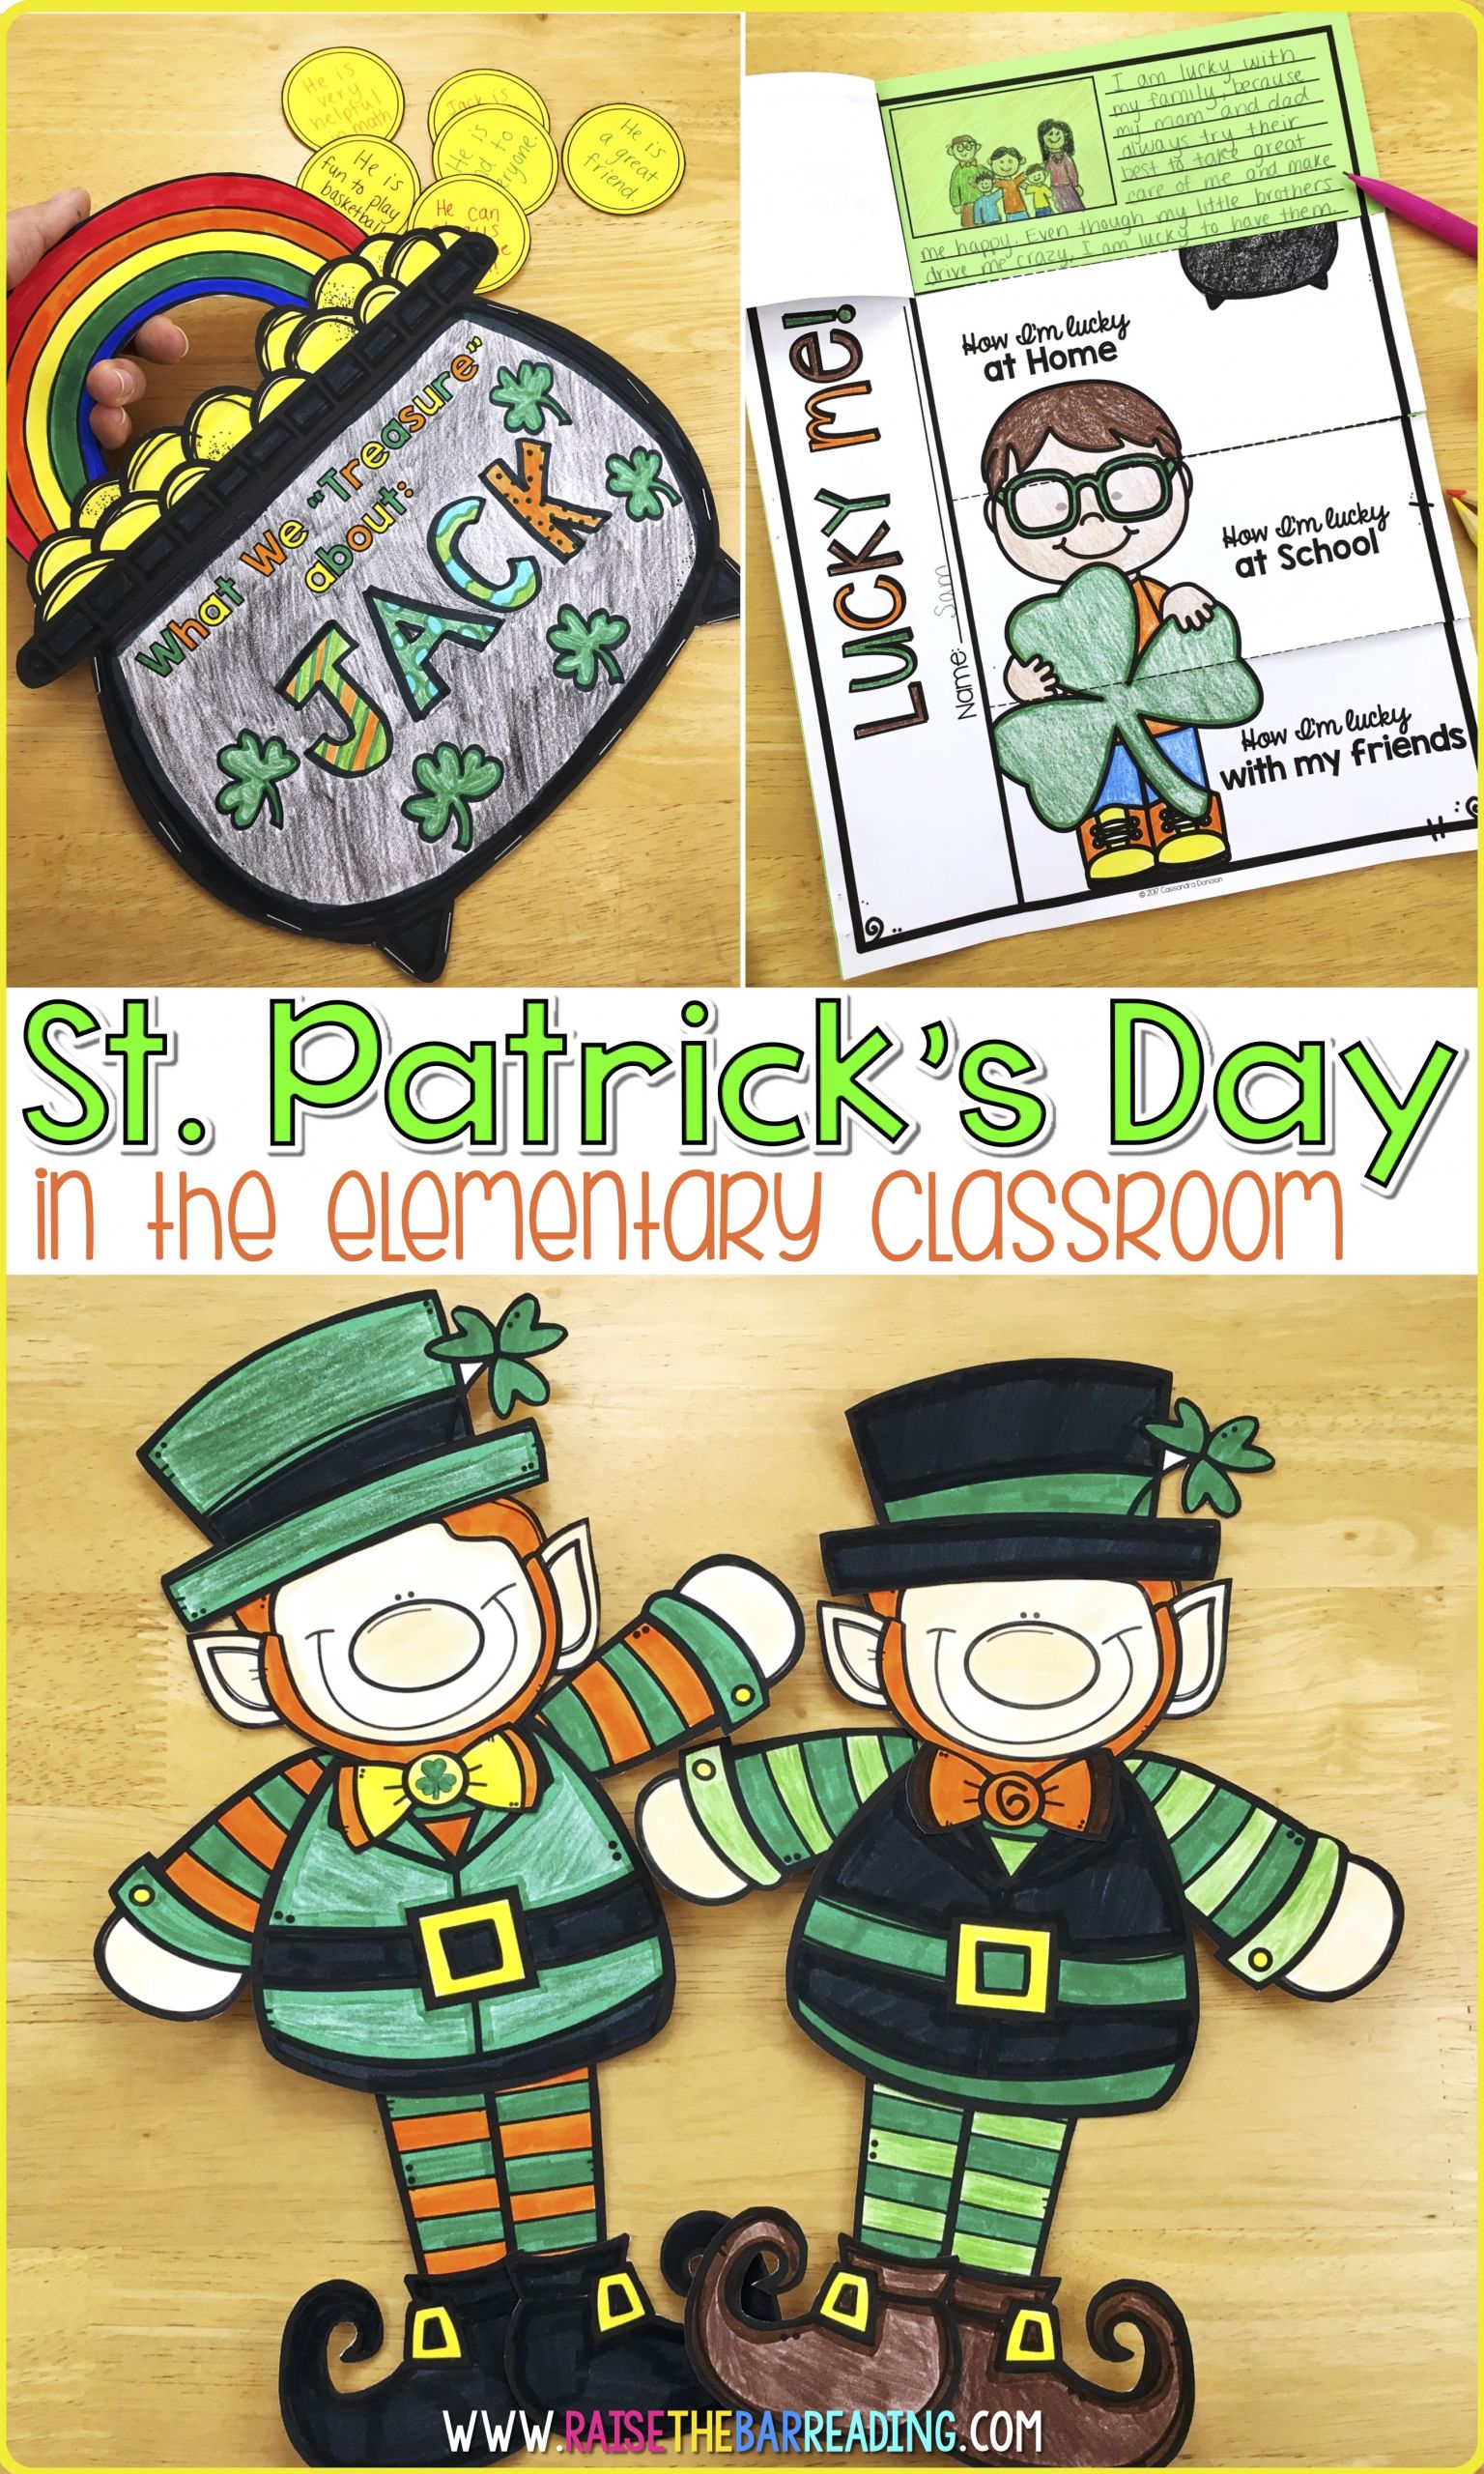 Saint Patrick's Day Activities For Elementary Students
 Low Prep St Patrick s Day Activities for Elementary